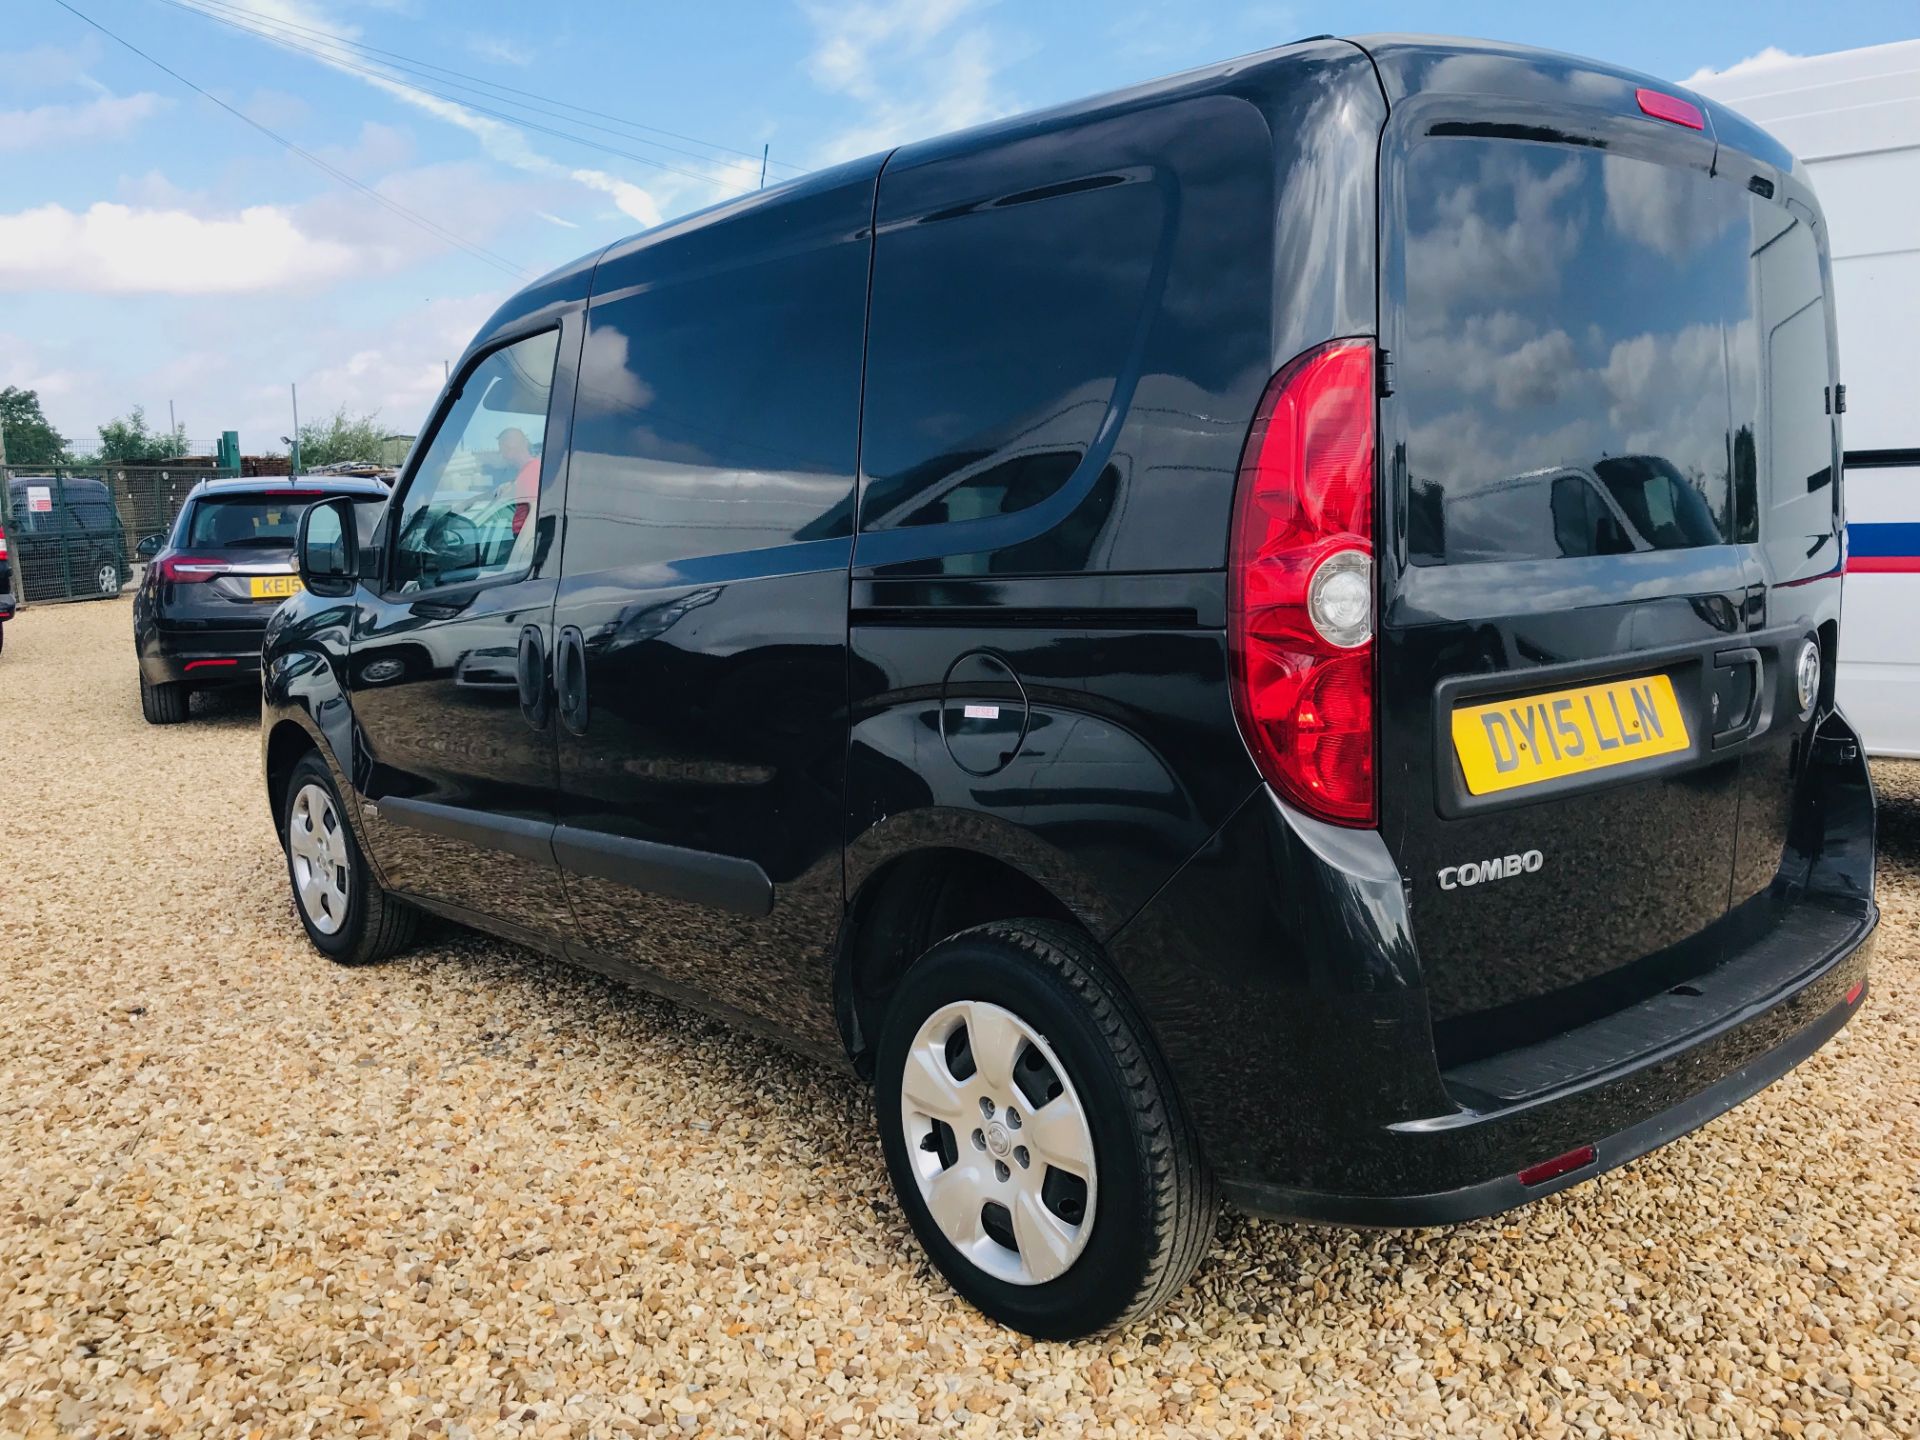 VAUXHALL COMBO CDTI "SPORTIVE - BLACK EDITION" (15 REG - NEW SHAPE) 1 OWNER FSH *AIR CON* ELEC PACK - Image 5 of 15